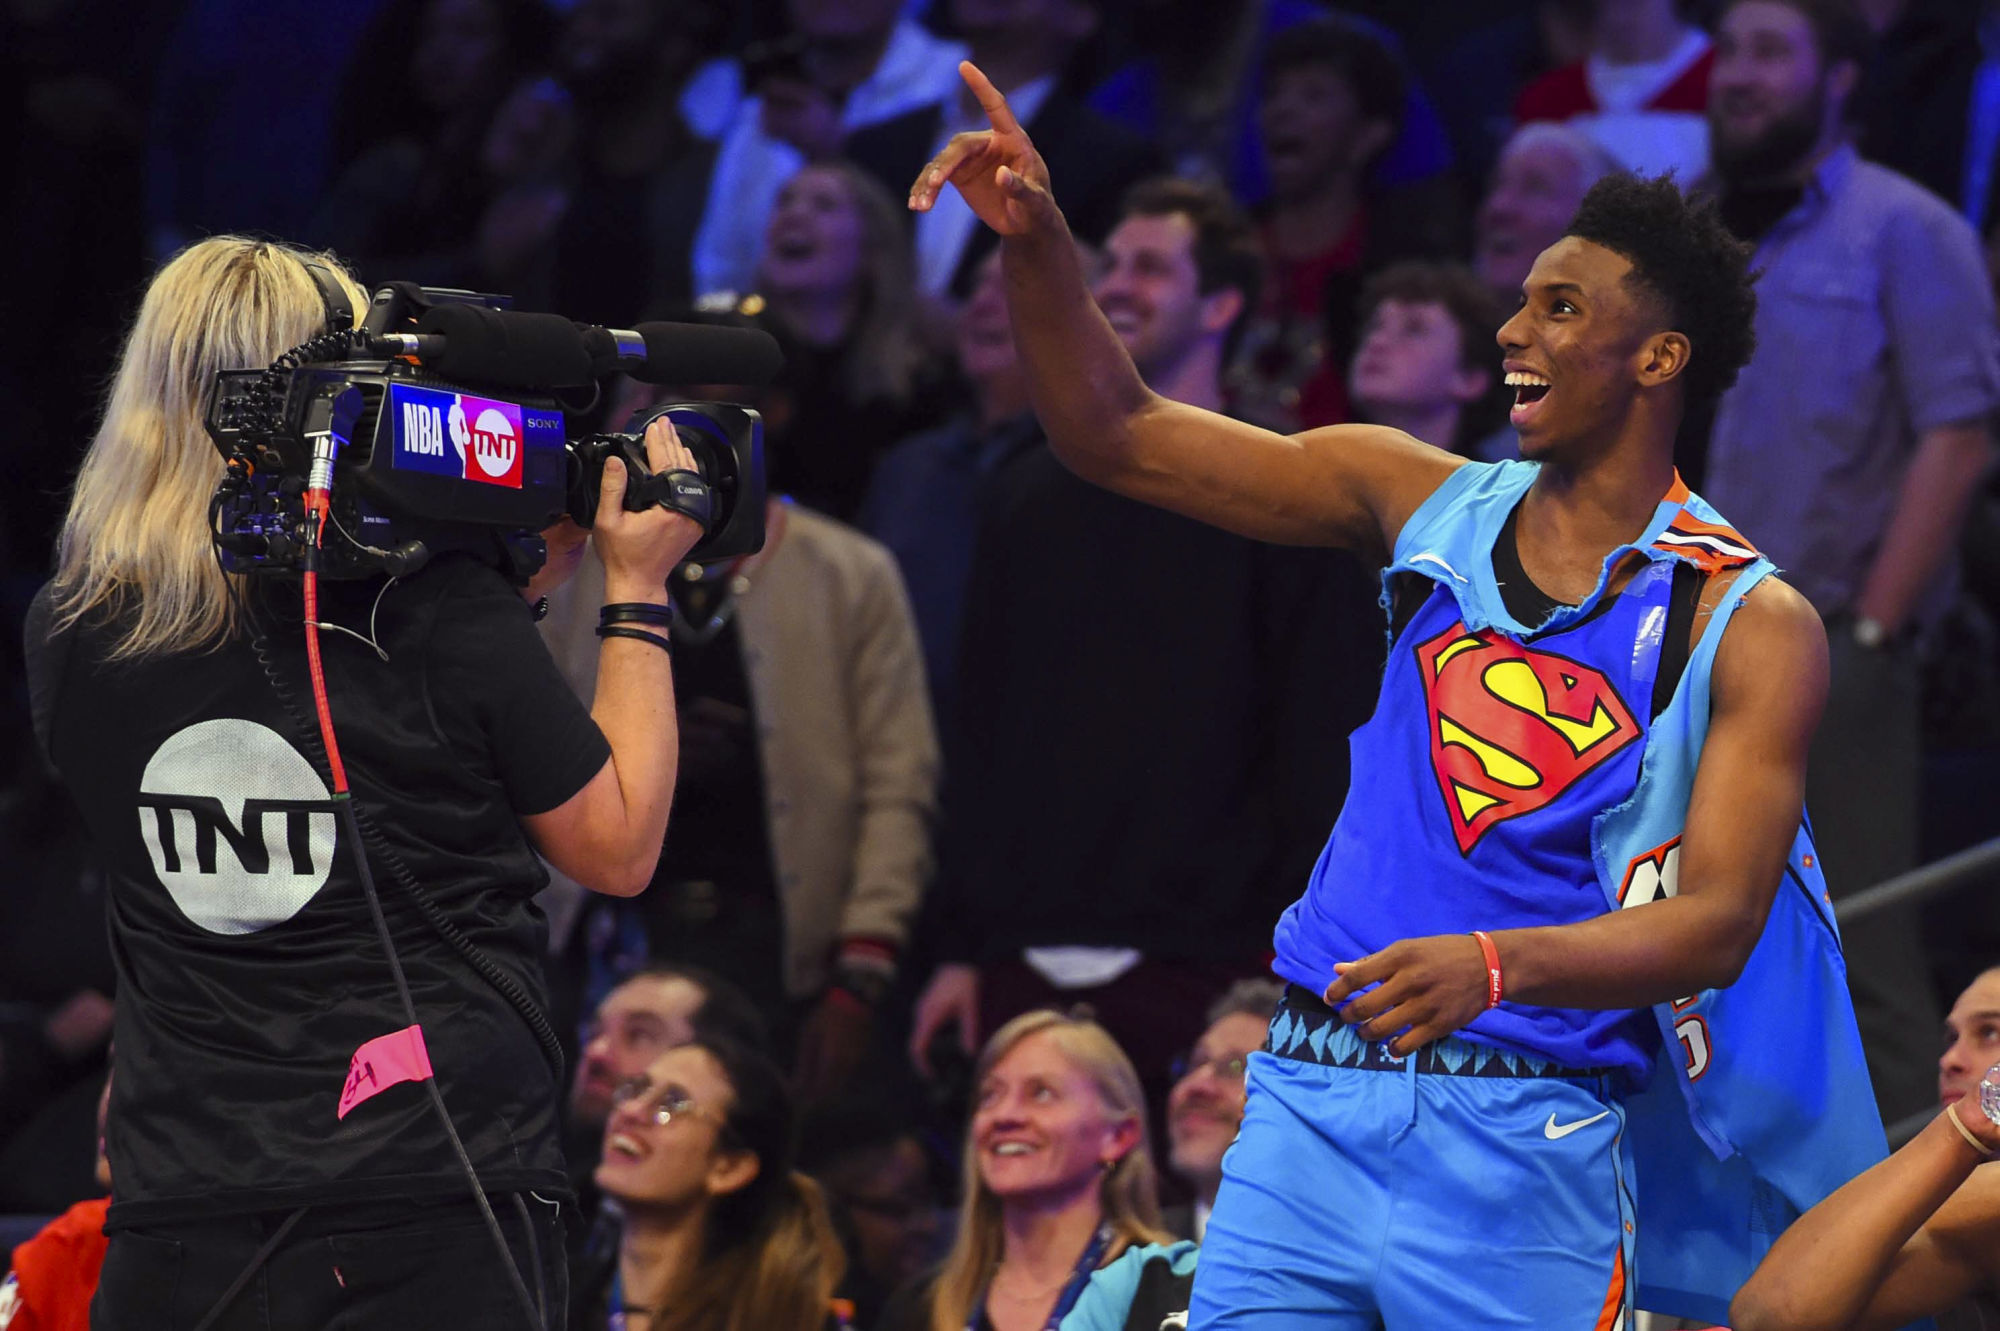 Feb 16, 2019; Charlotte, NC, USA; Oklahoma City Thunder forward Hamidou Diallo reacts after a dunk in the Slam Dunk Contest during the NBA All-Star Saturday Night at Spectrum Center. 
Photo: SUSA / Icon Sport